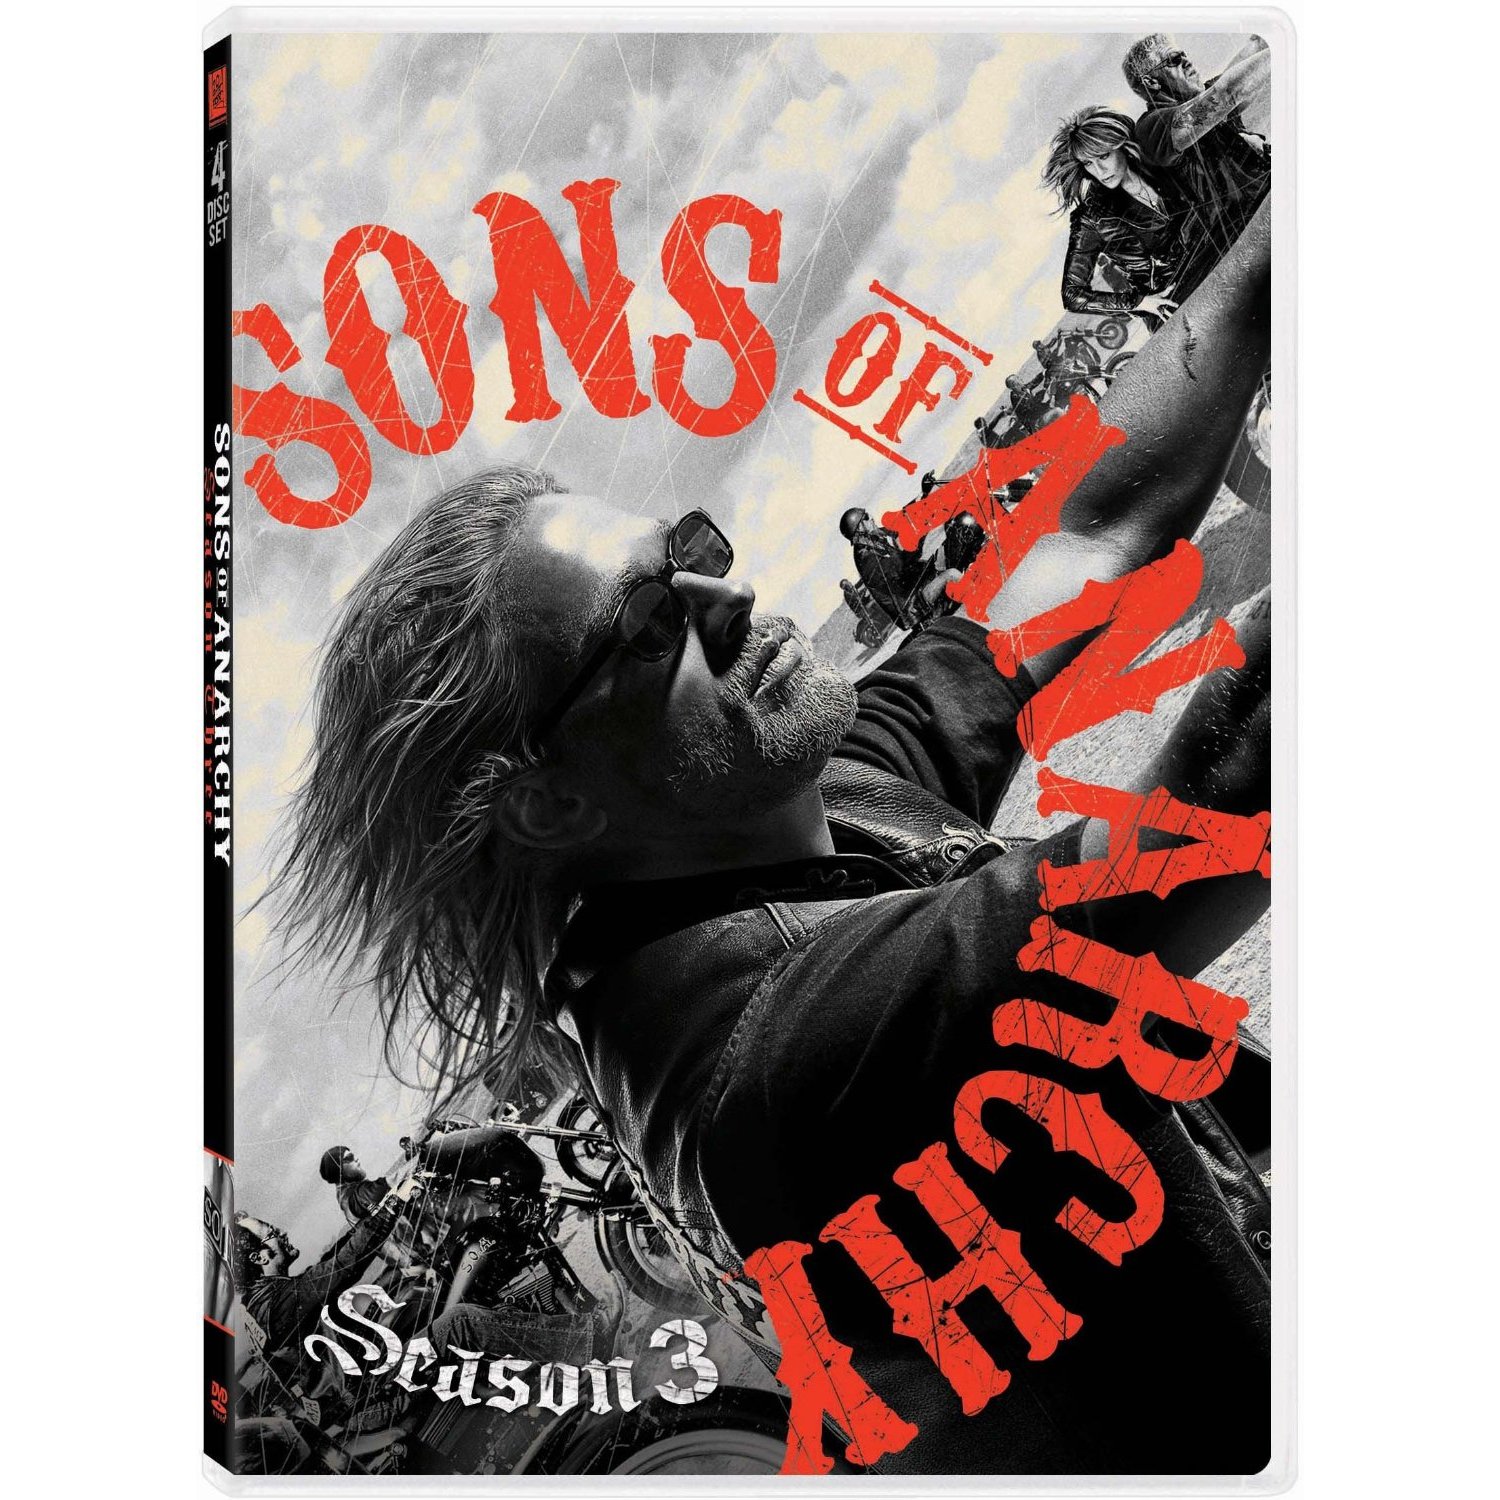 Sons of Anarchy Season 3 Disk 3